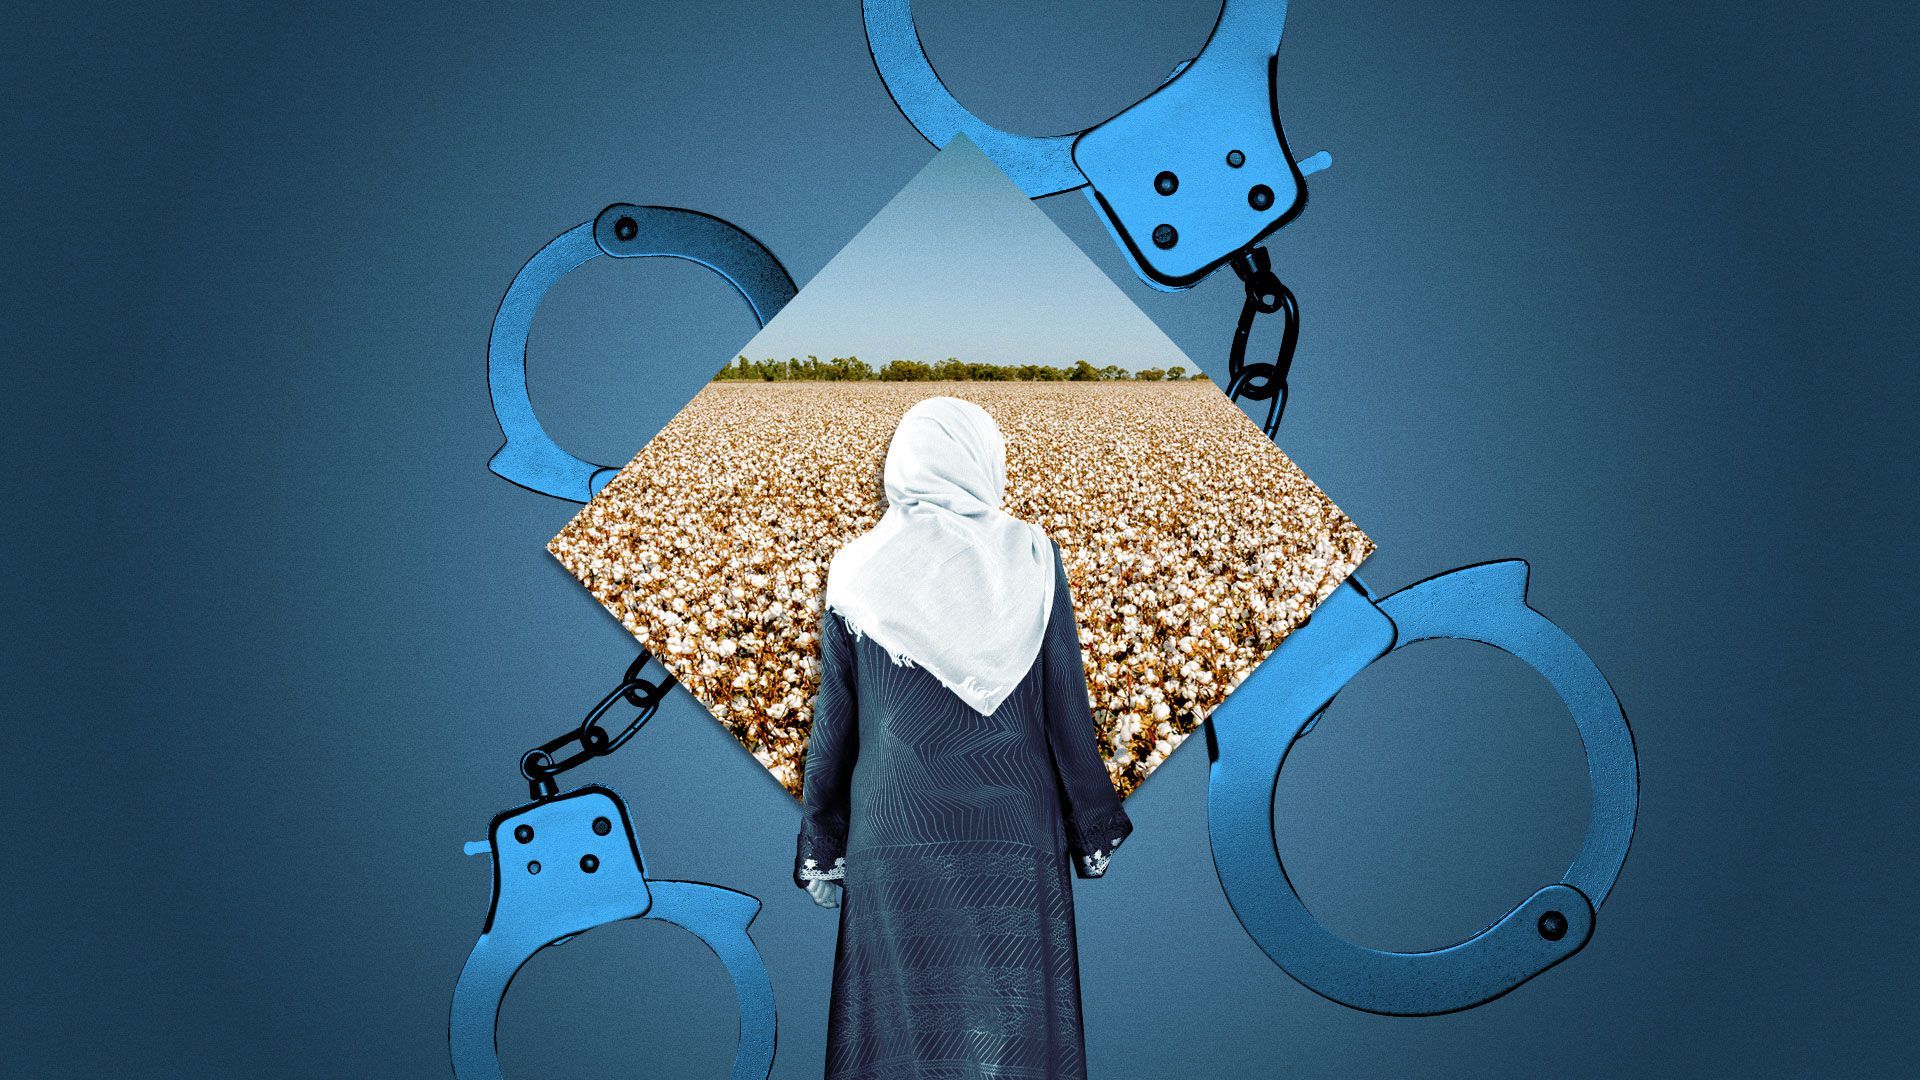 Illustration of Muslim woman facing a cotton field with handcuffs